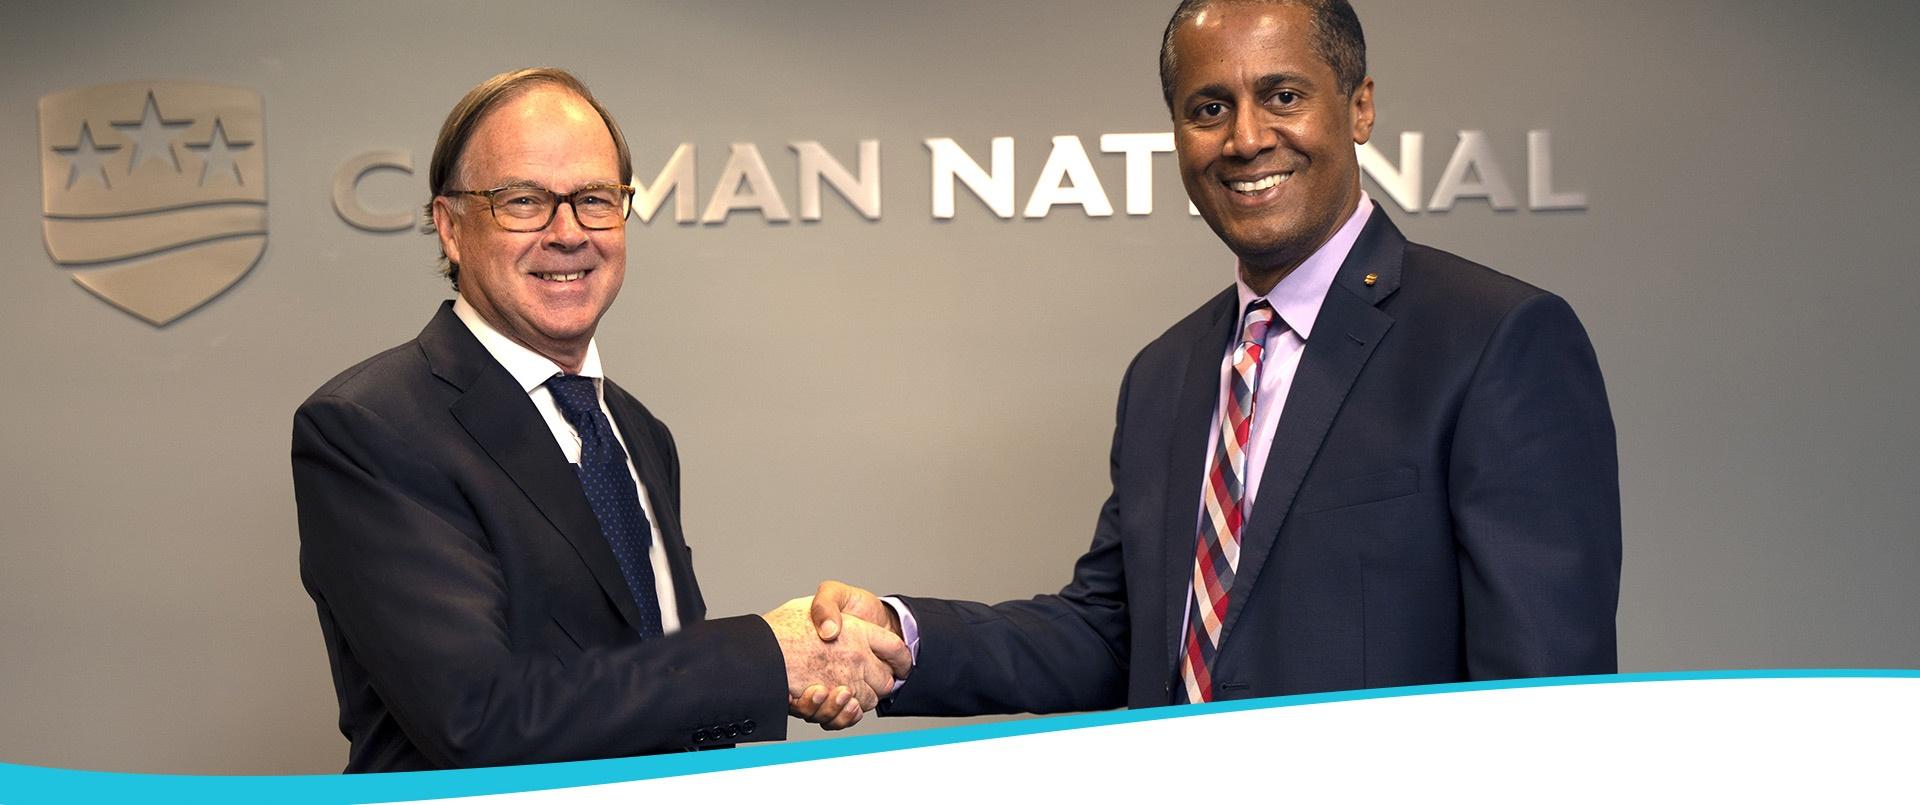 RBKY & CNB - Cayman National